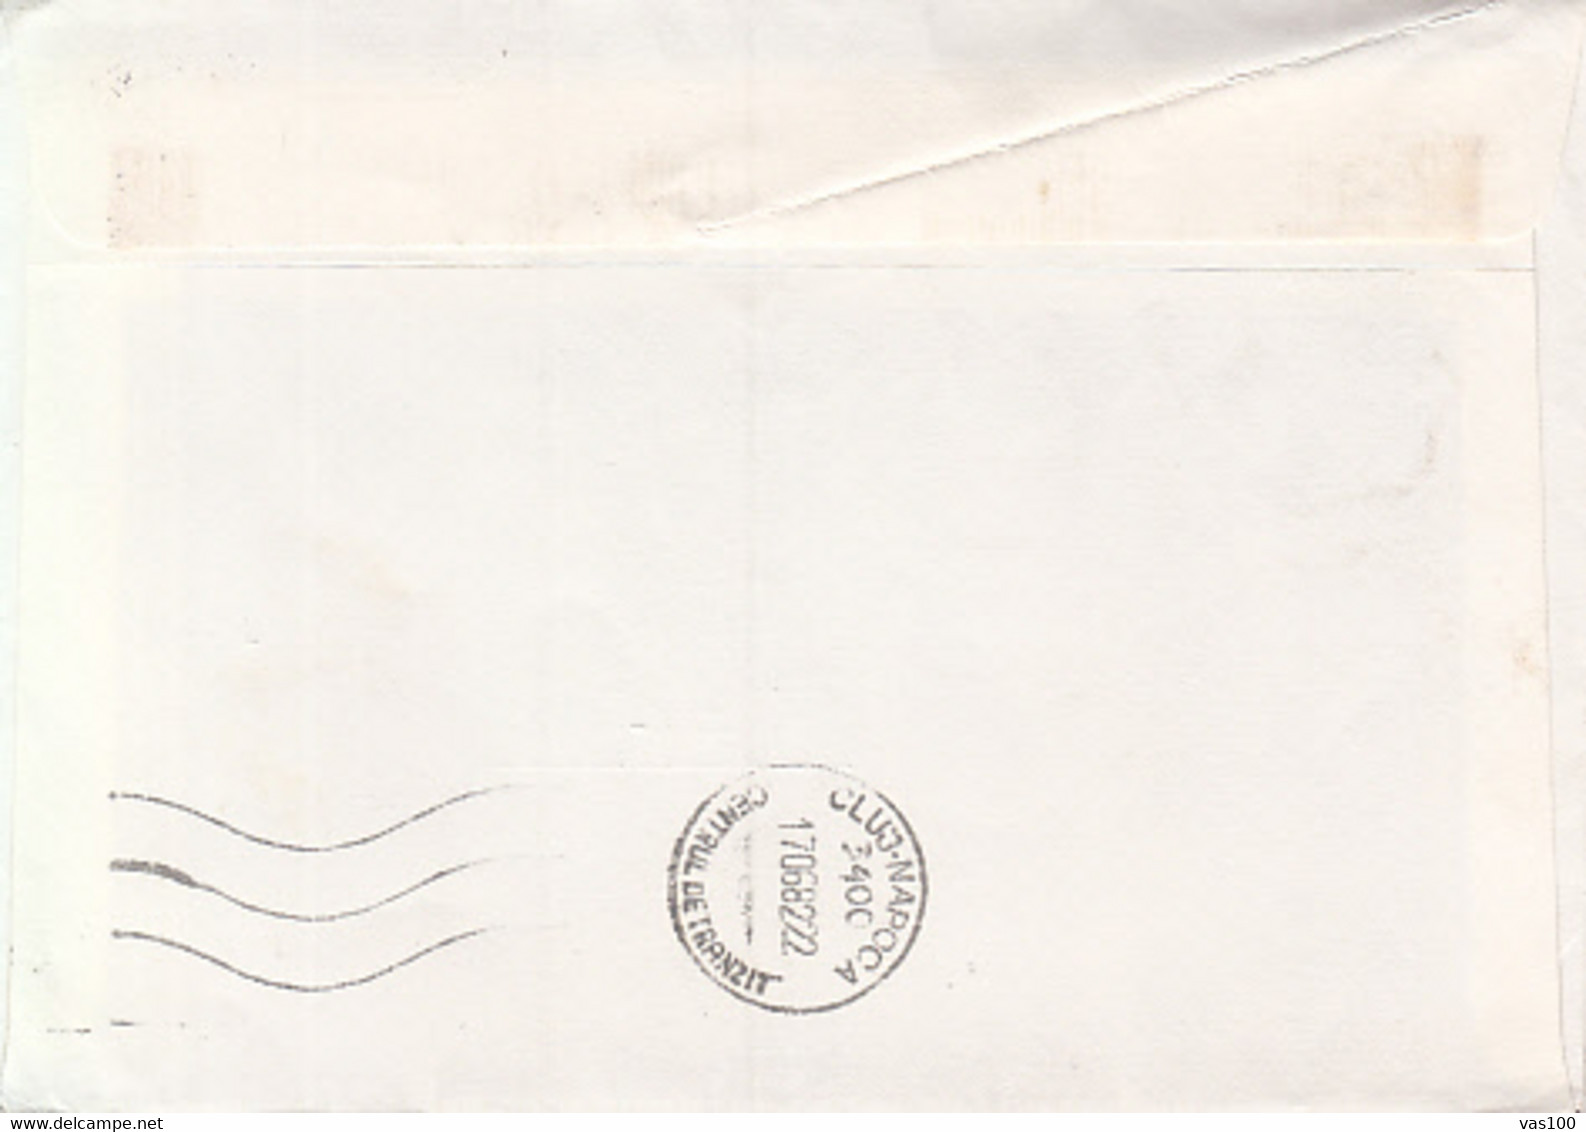 GRAND DUKE JEAN, SYNAGOGUE, STAMPS ON COVER, 1982, LUXEMBOURG - Covers & Documents